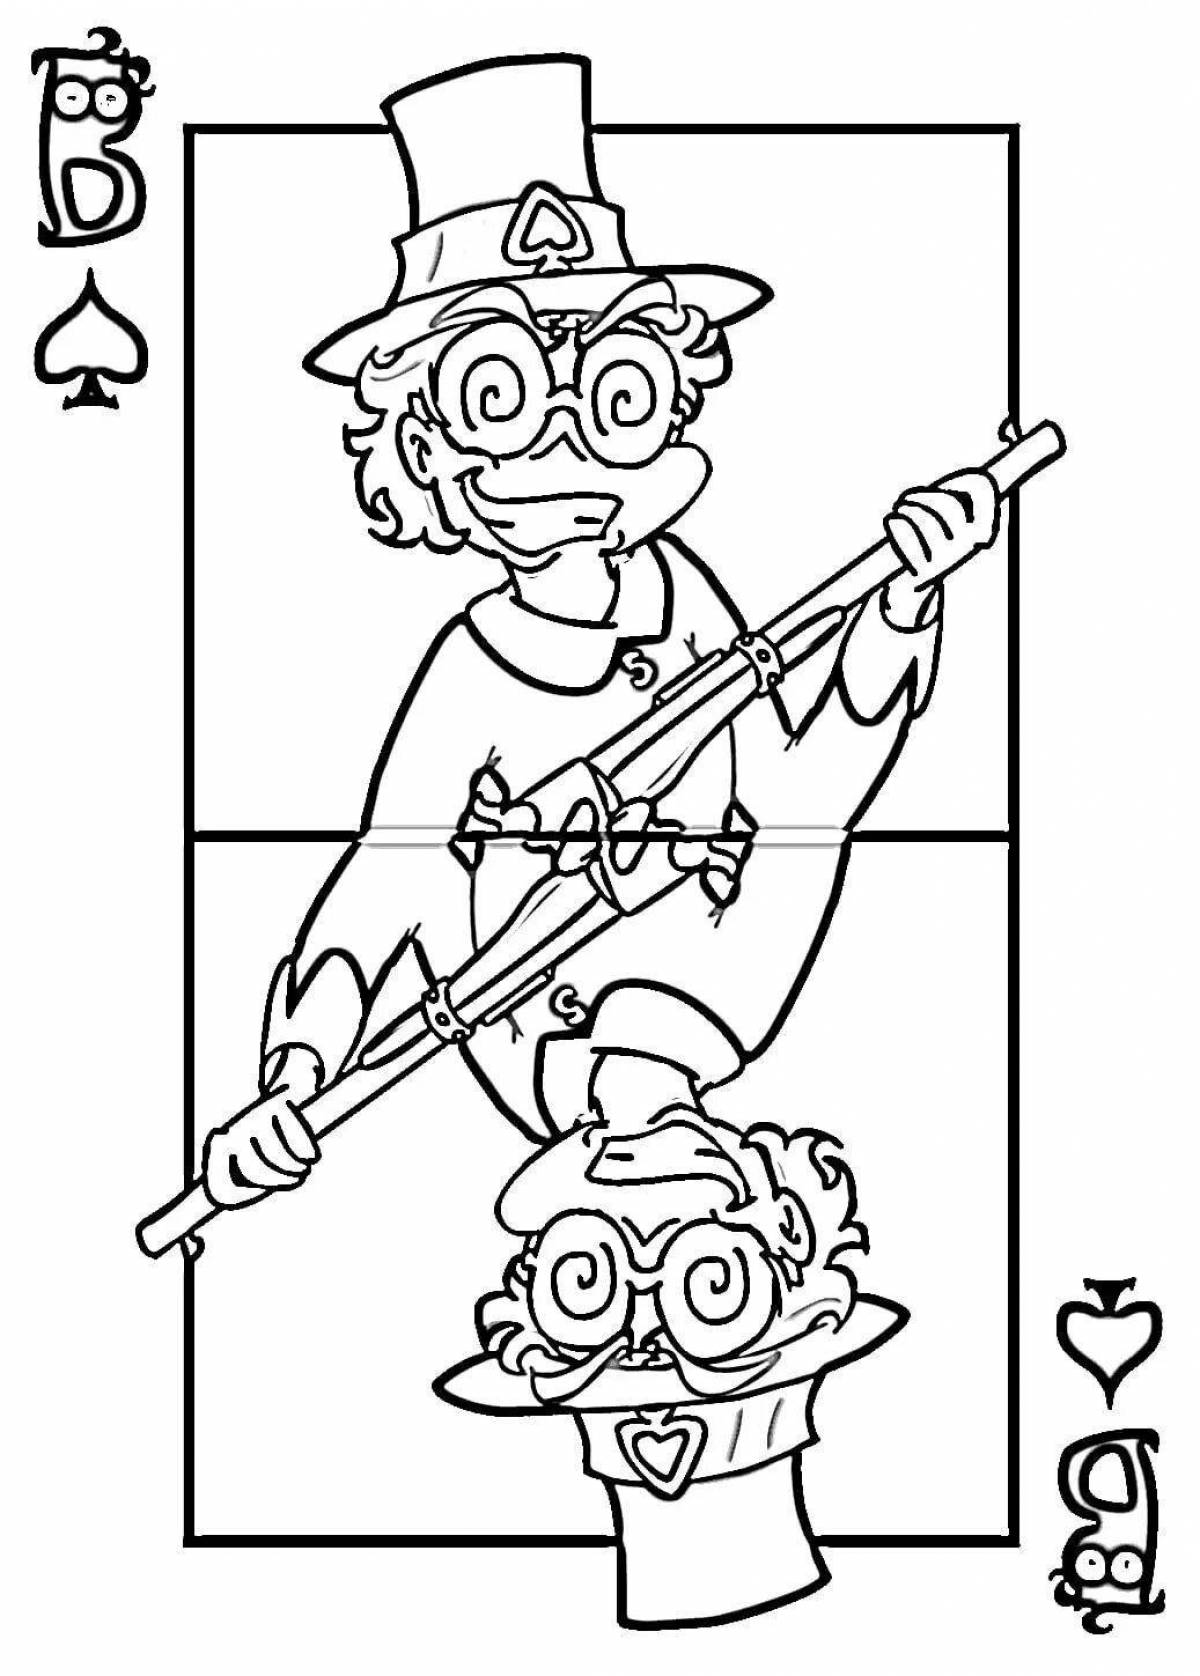 Colorful clones 13 coloring cards